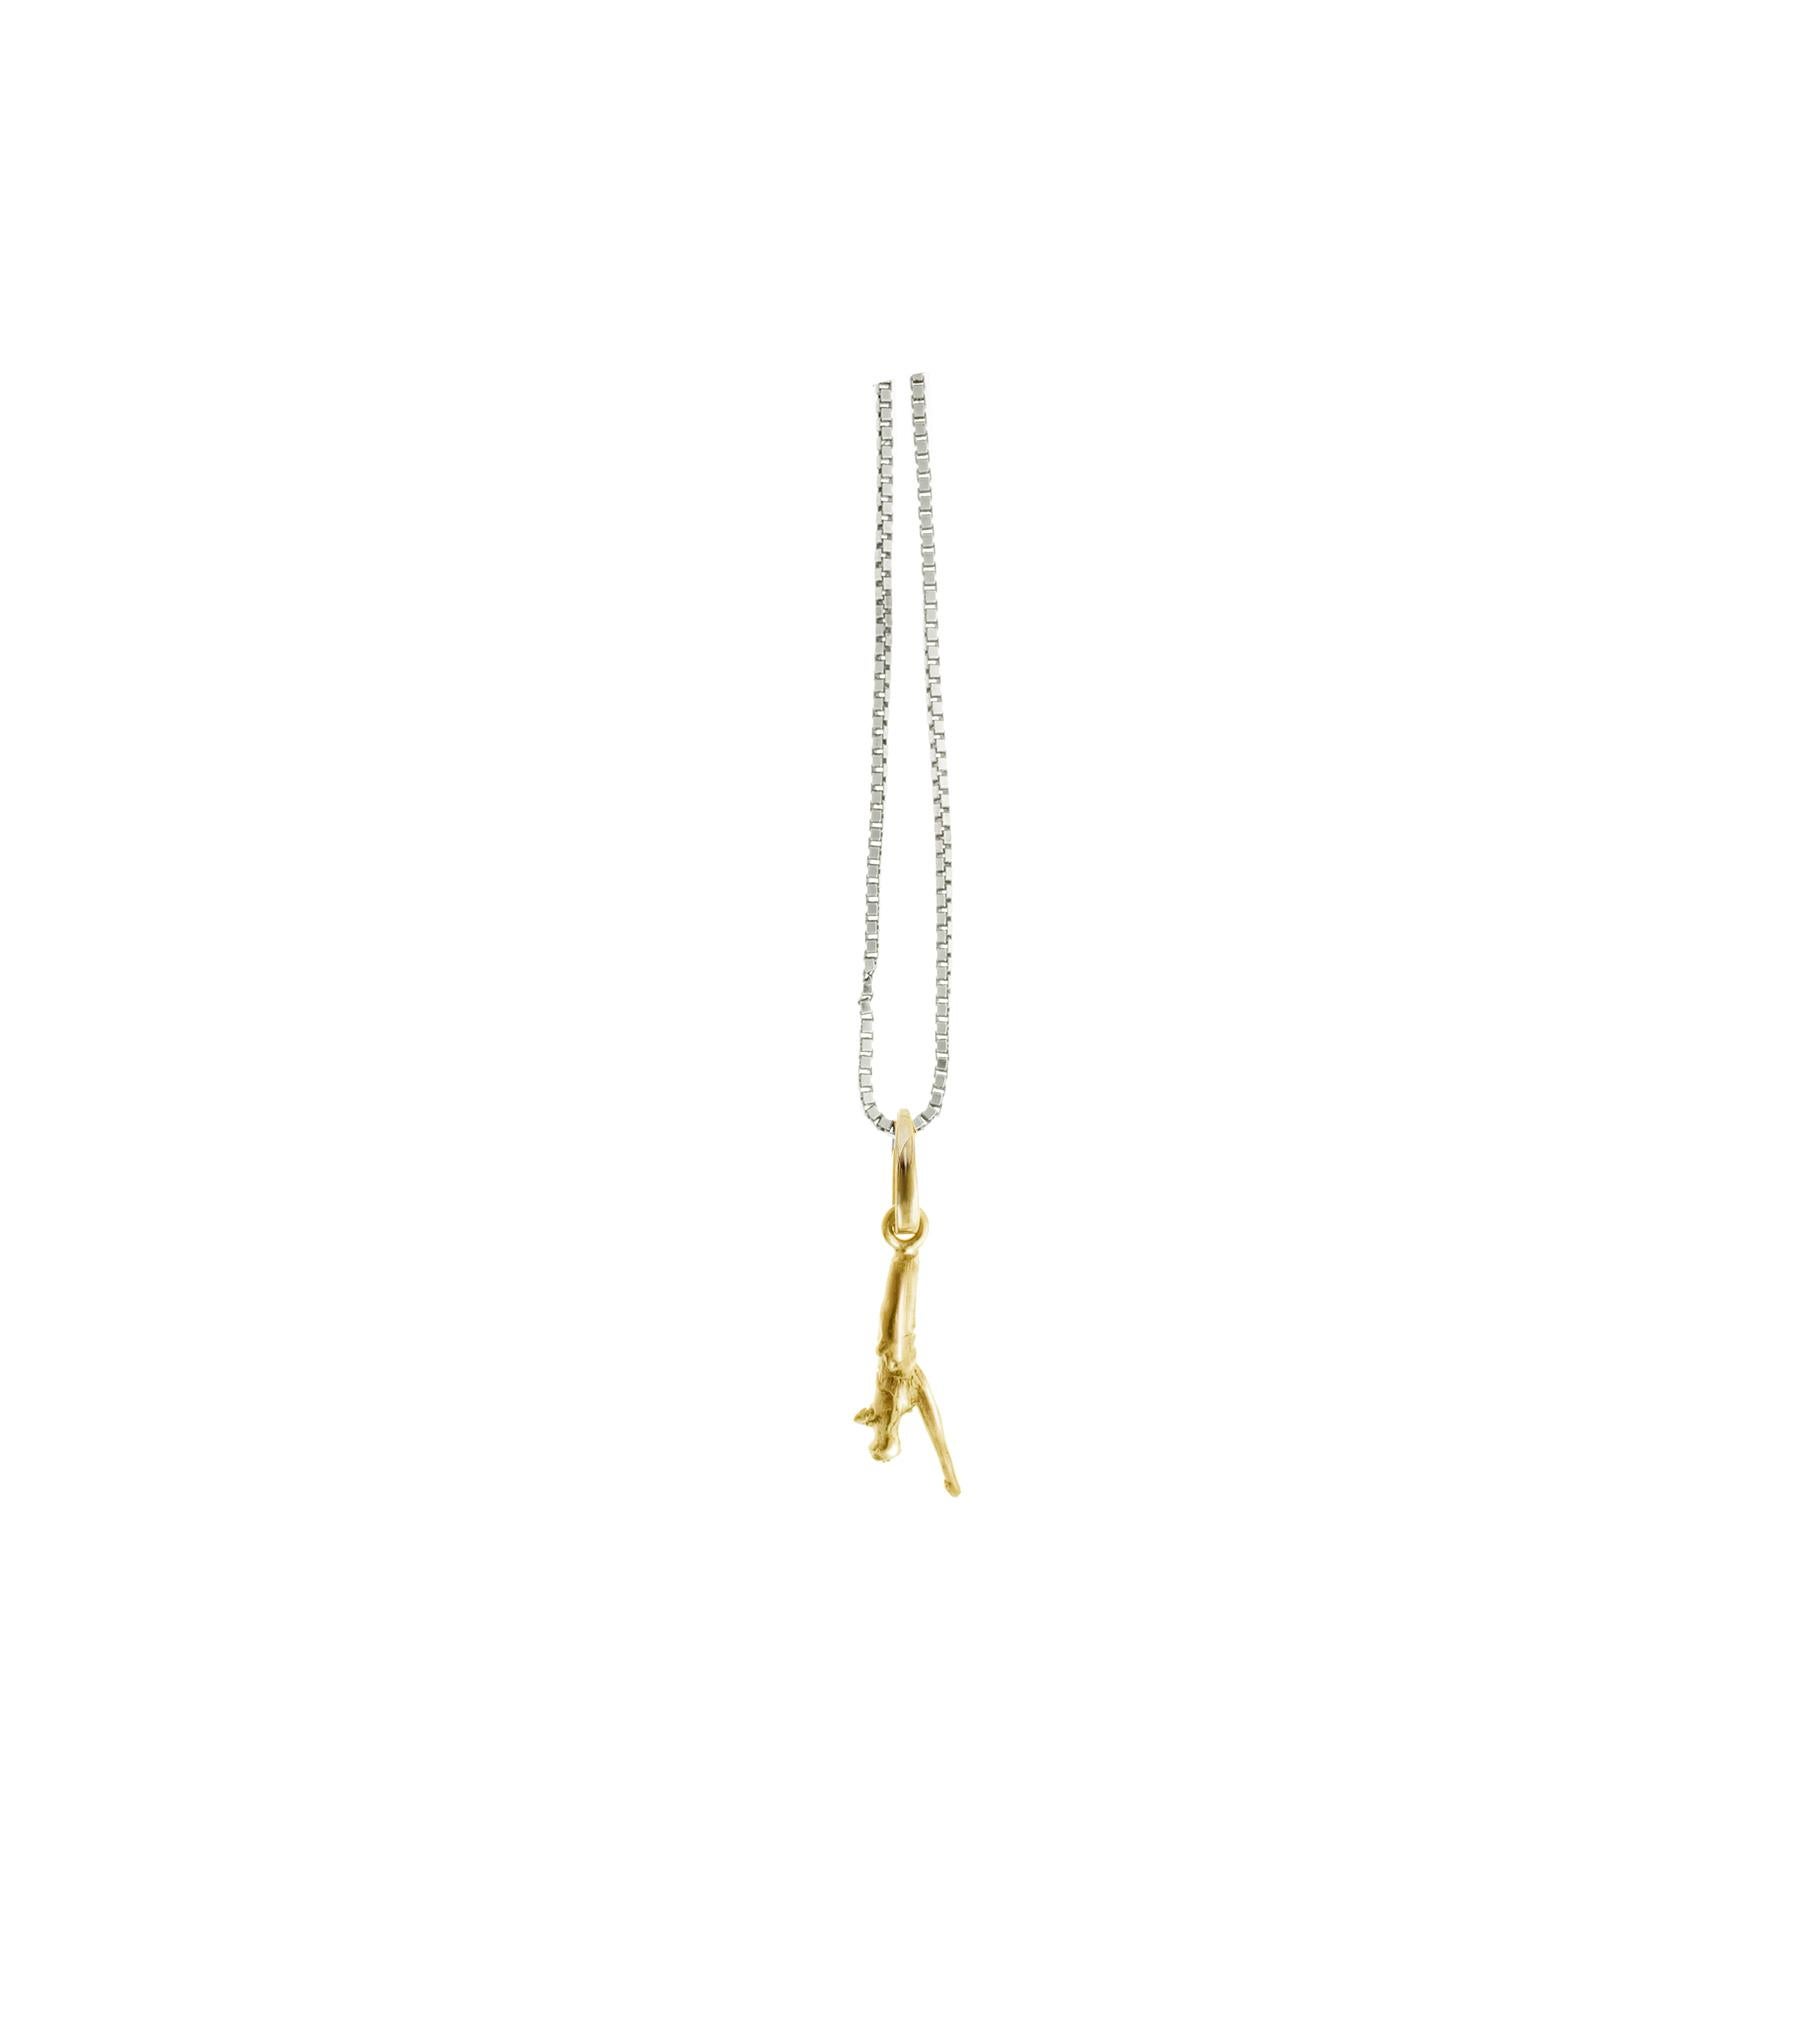 This 18 karat yellow gold Tea twig Chainka contemporary pendant is the jewellery by artist piece, which opens the collection of “tiny pieces”. This delicate shape has been discovered during a tea ceremony when one little young leaf of tea came into